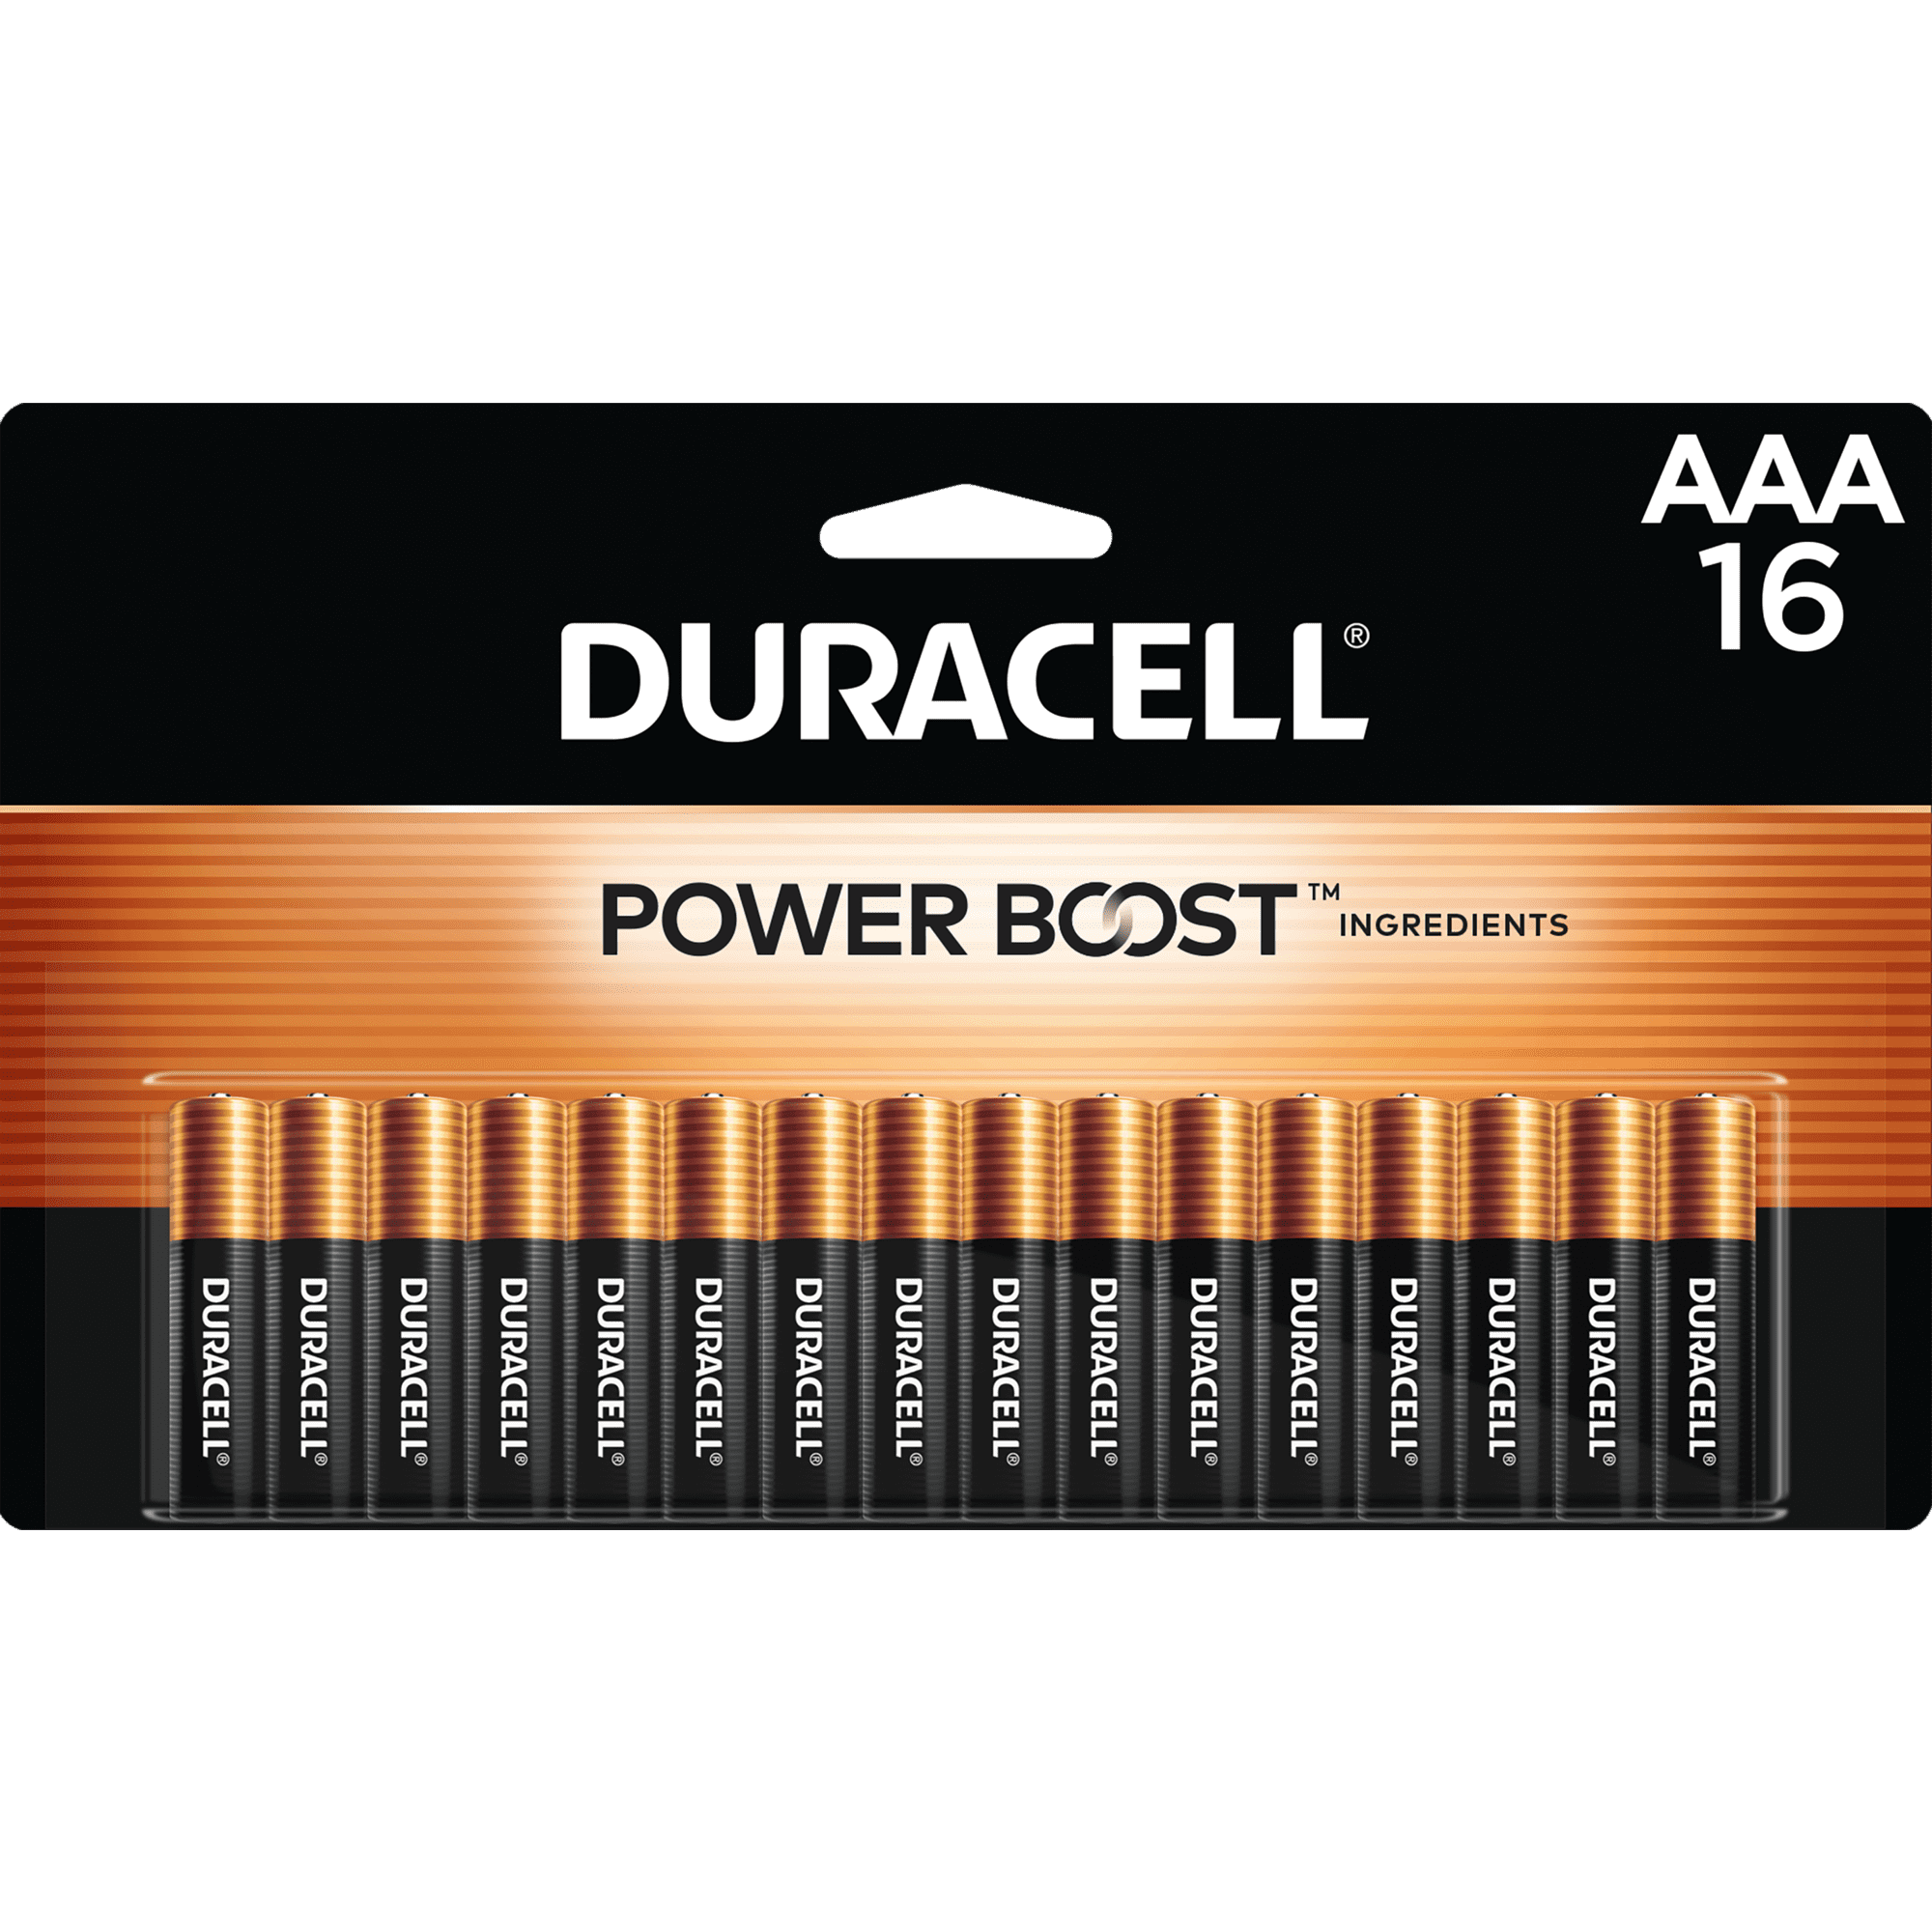 Duracell Coppertop AAA Battery with POWER BOOST™, 16 Pack Long-Lasting Batteries - image 1 of 9